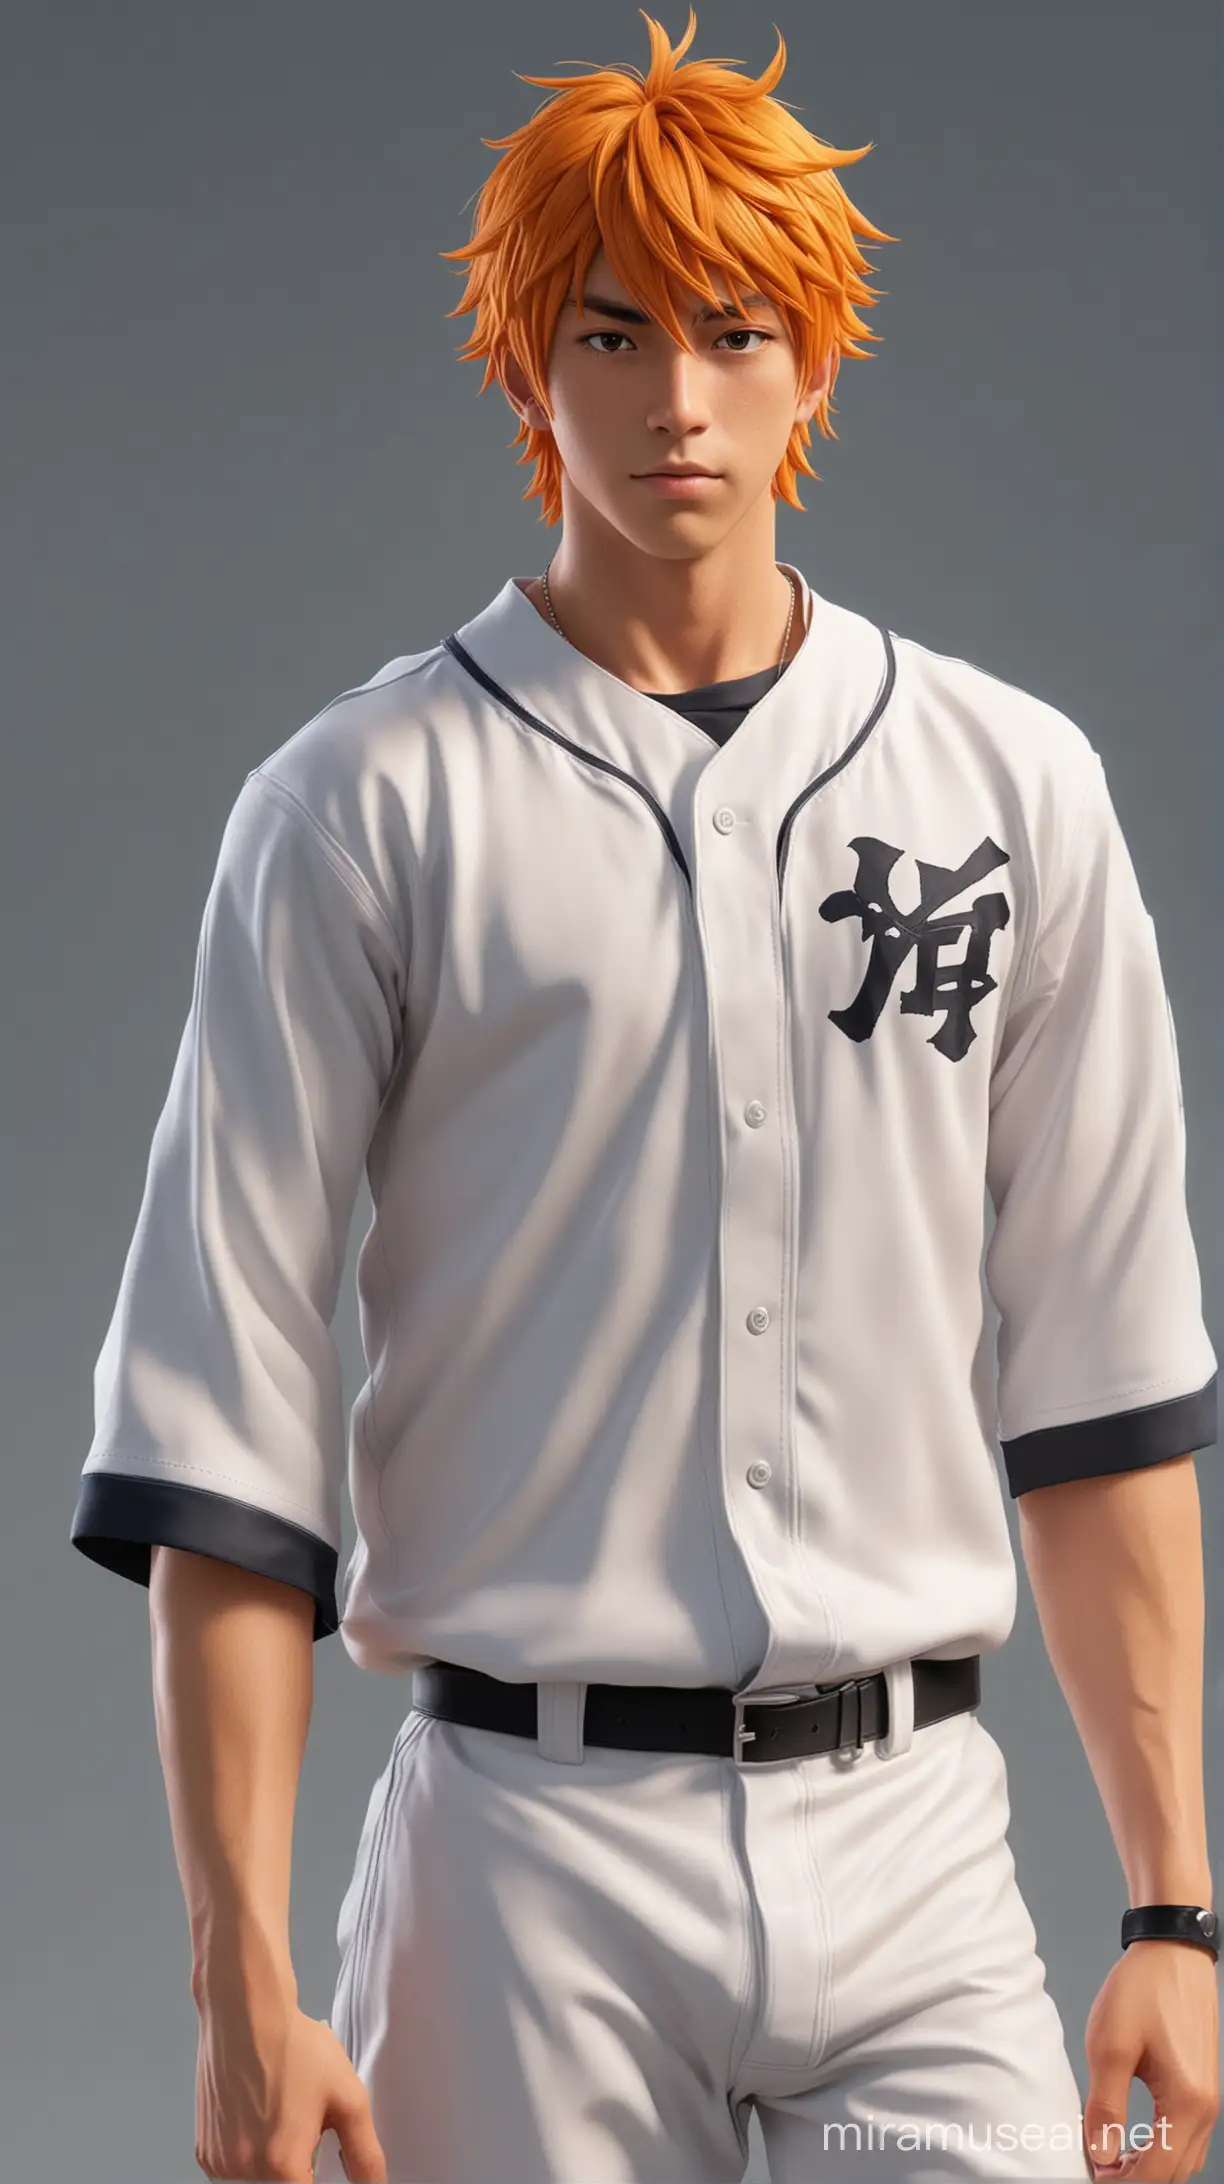  Full full body photorealistic ultra realism high definition aesthetic stabilized diffusion picture of handsome hunky fractal clean shaven hayate ichinosi as orange haired Ichigo.wearin a baseball uniforms..standing firmly face front camera focus..